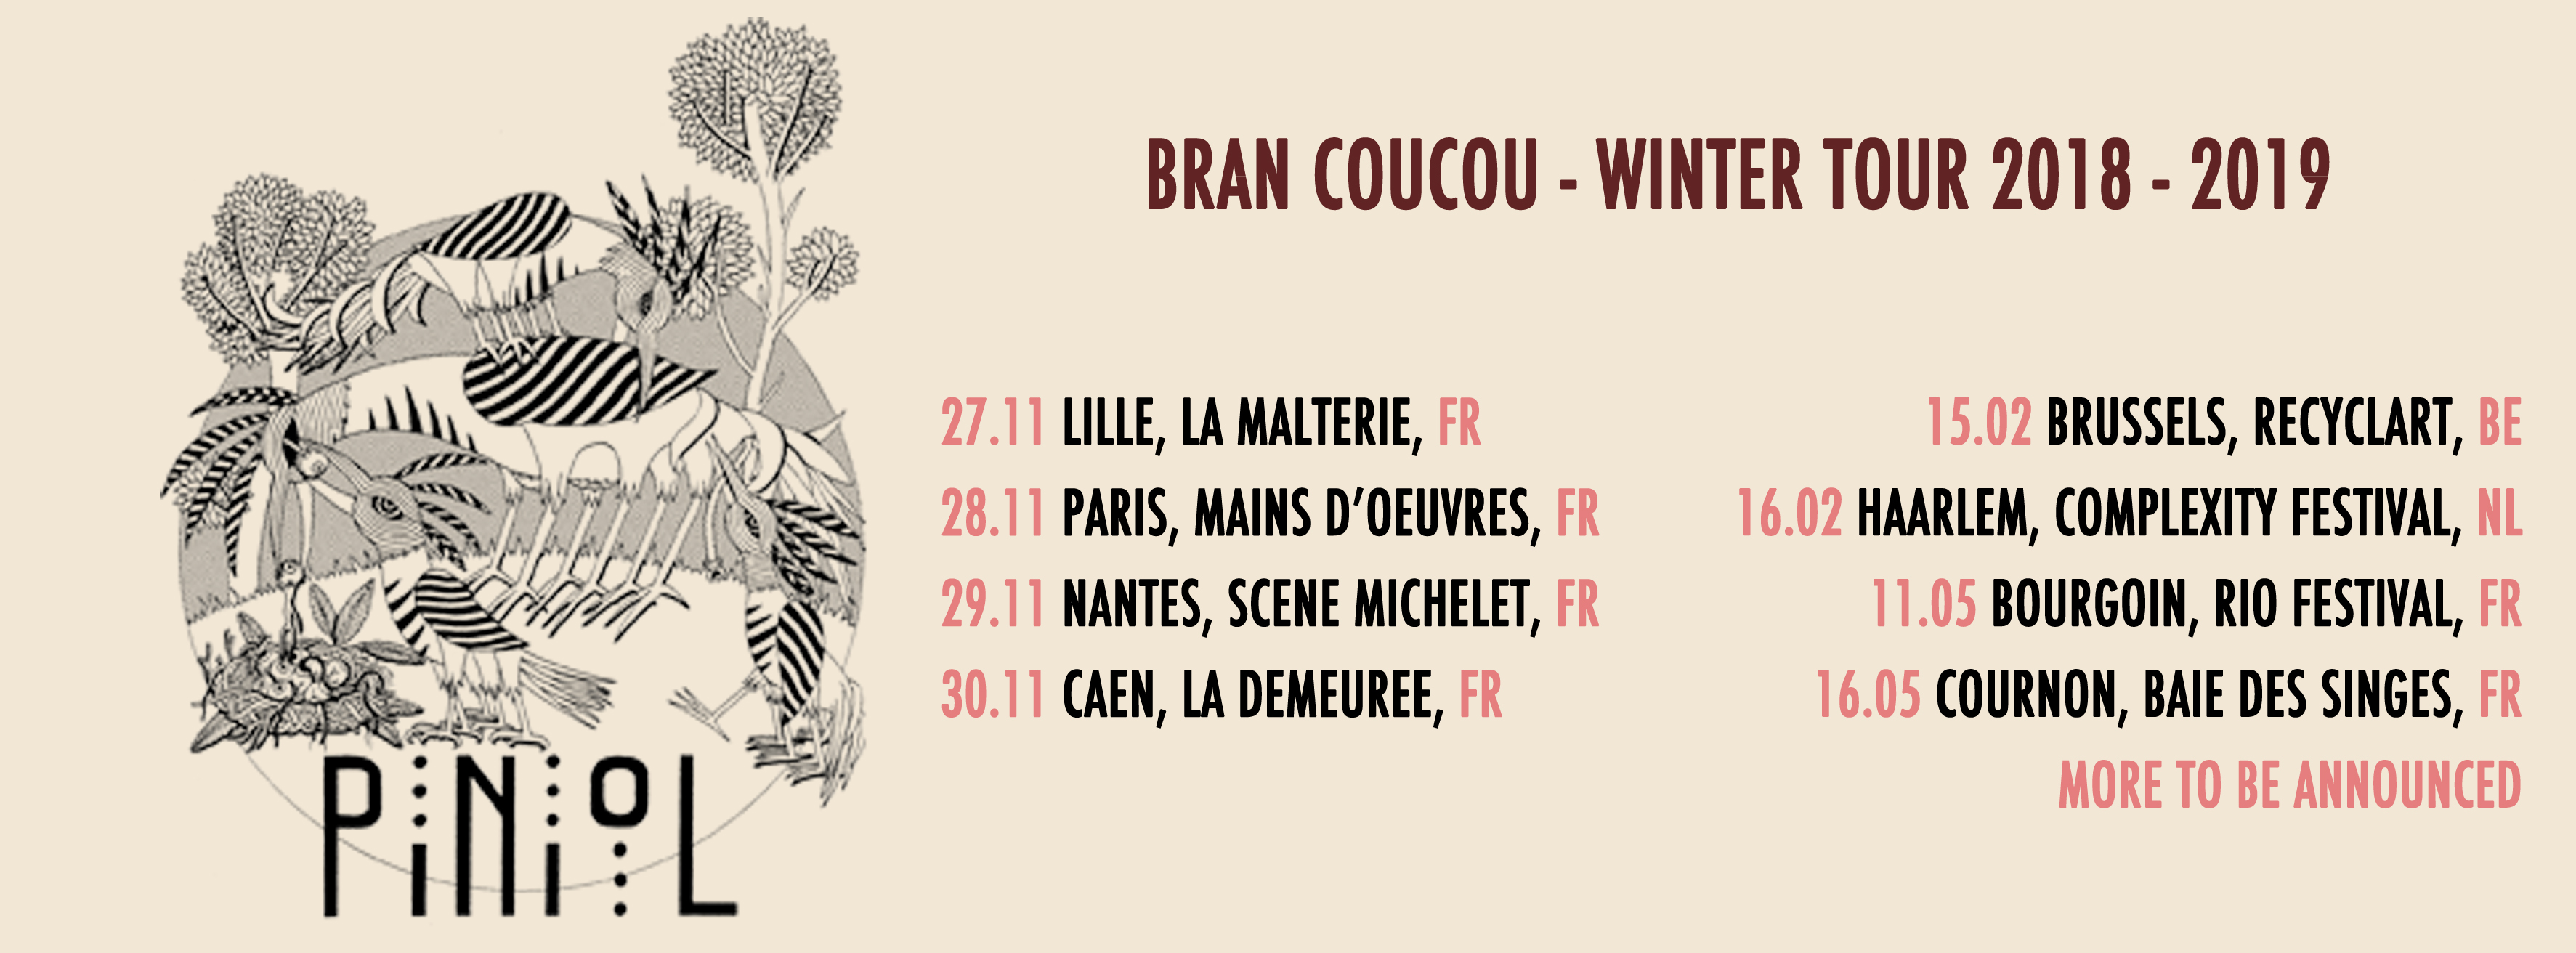 PinioL winter tour - artwork by Willy ténia and Dur et Doux